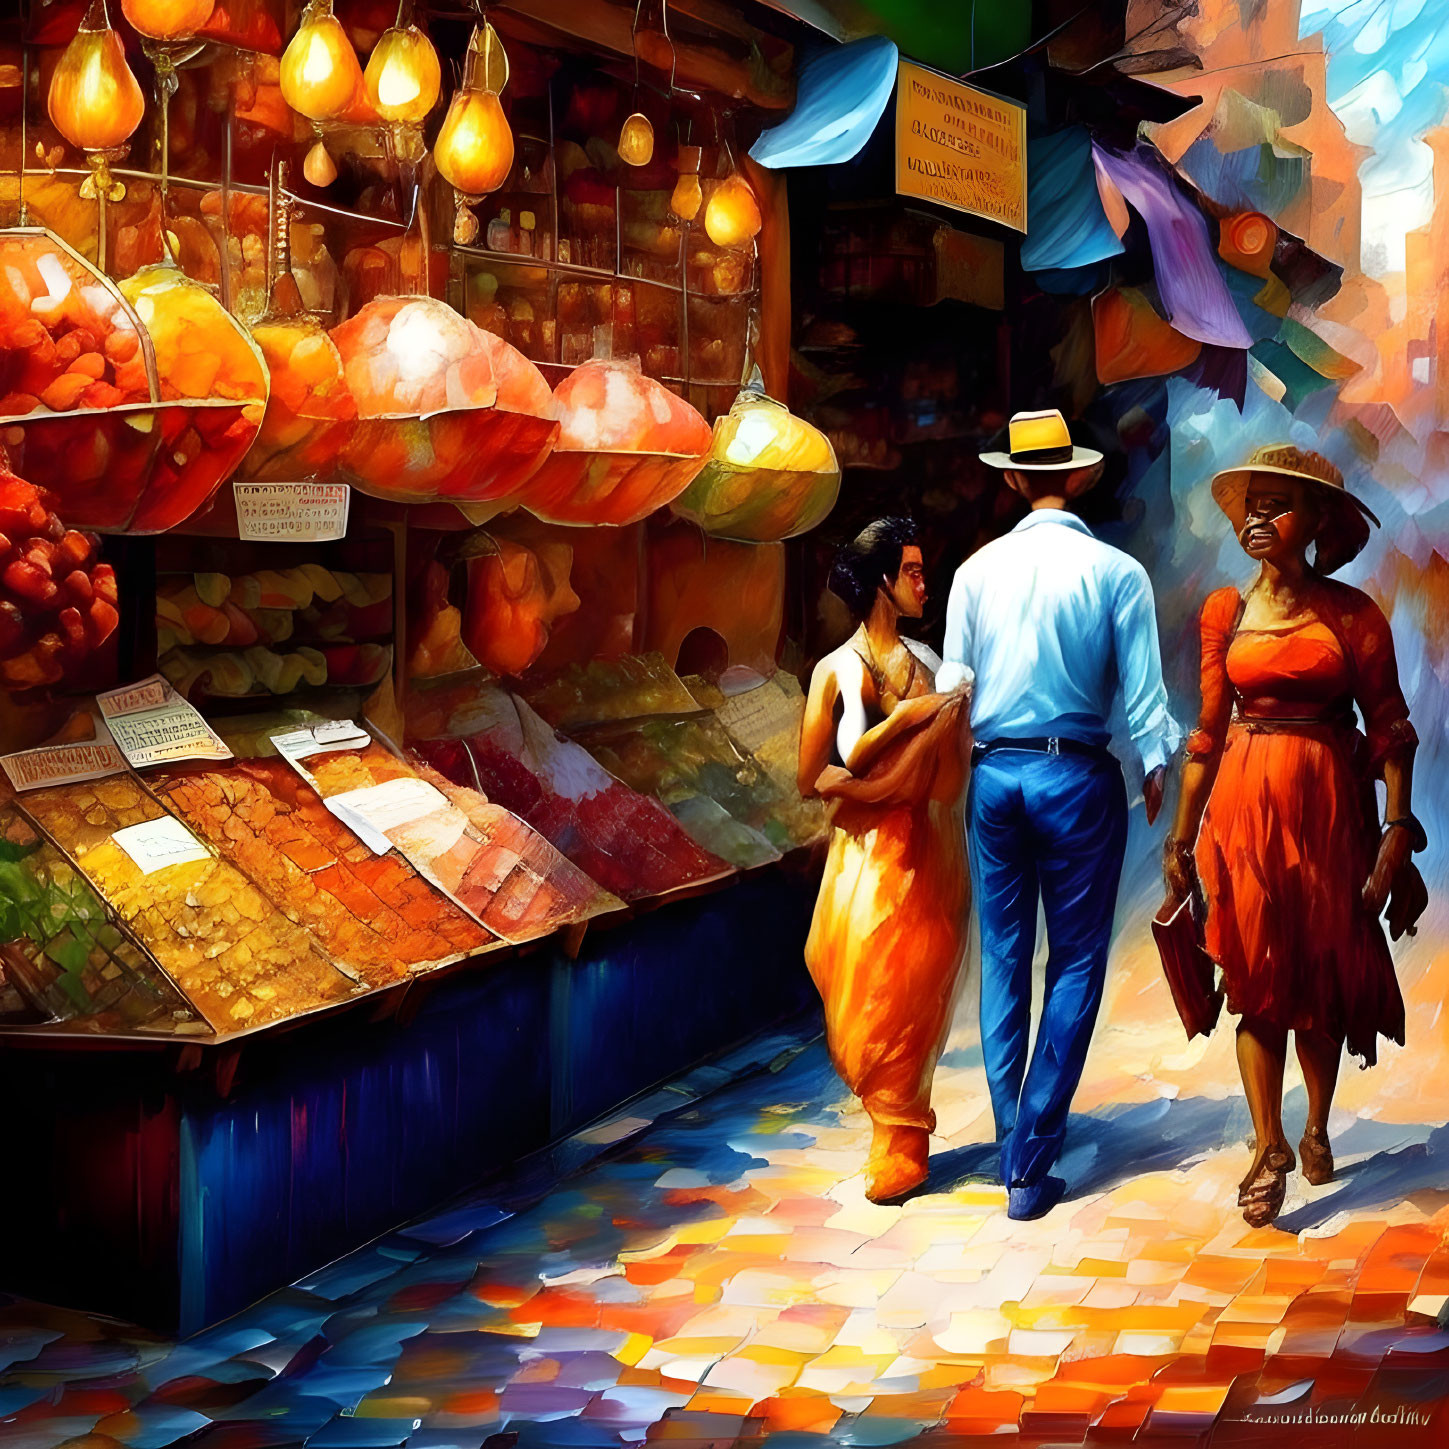 Colorful market scene with stalls, couple chatting, and woman in orange dress.